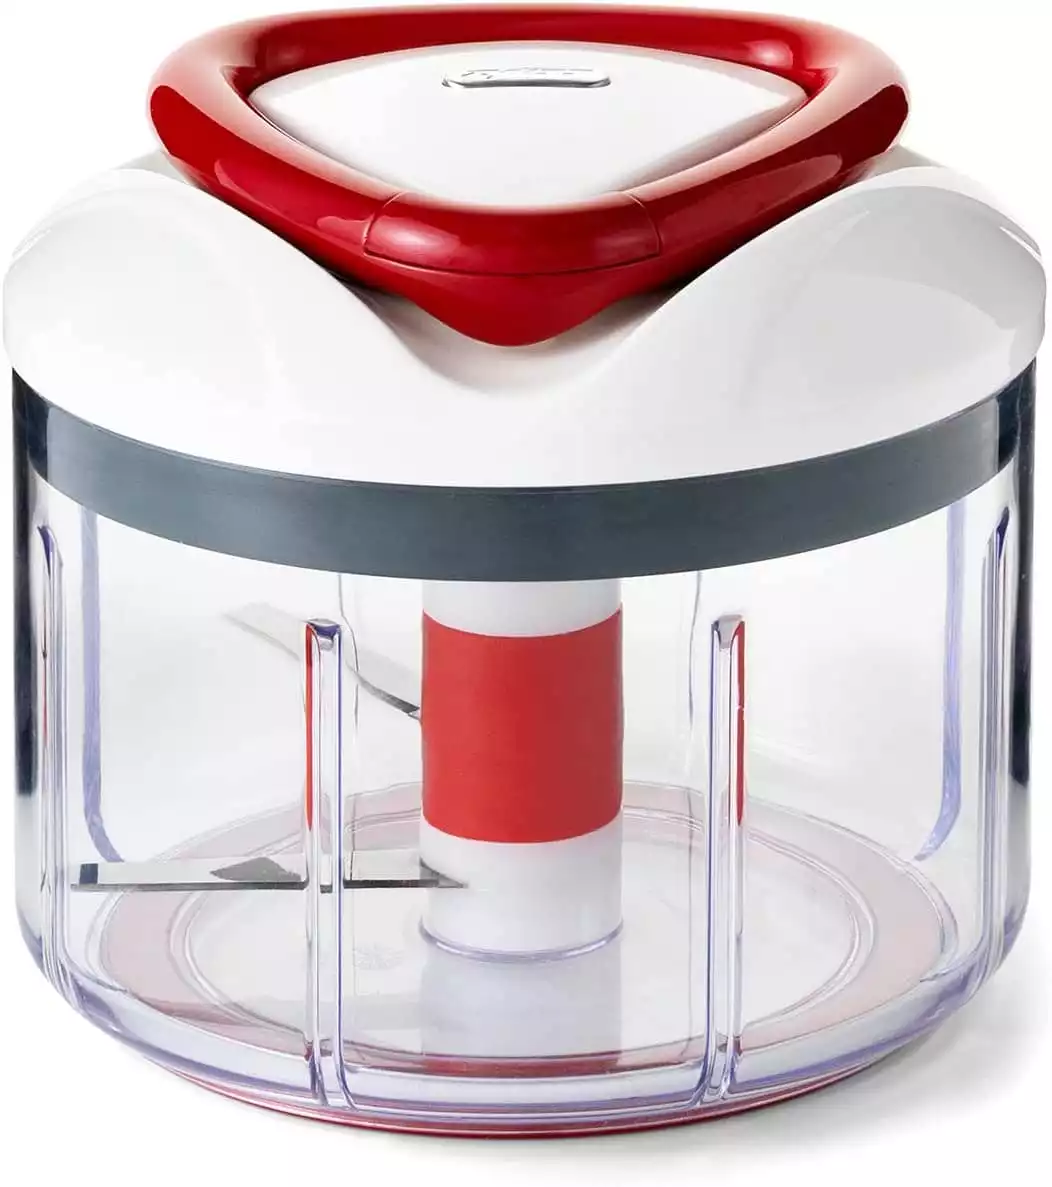 ZYLISS Easy Pull Food Chopper and Manual Food Processor